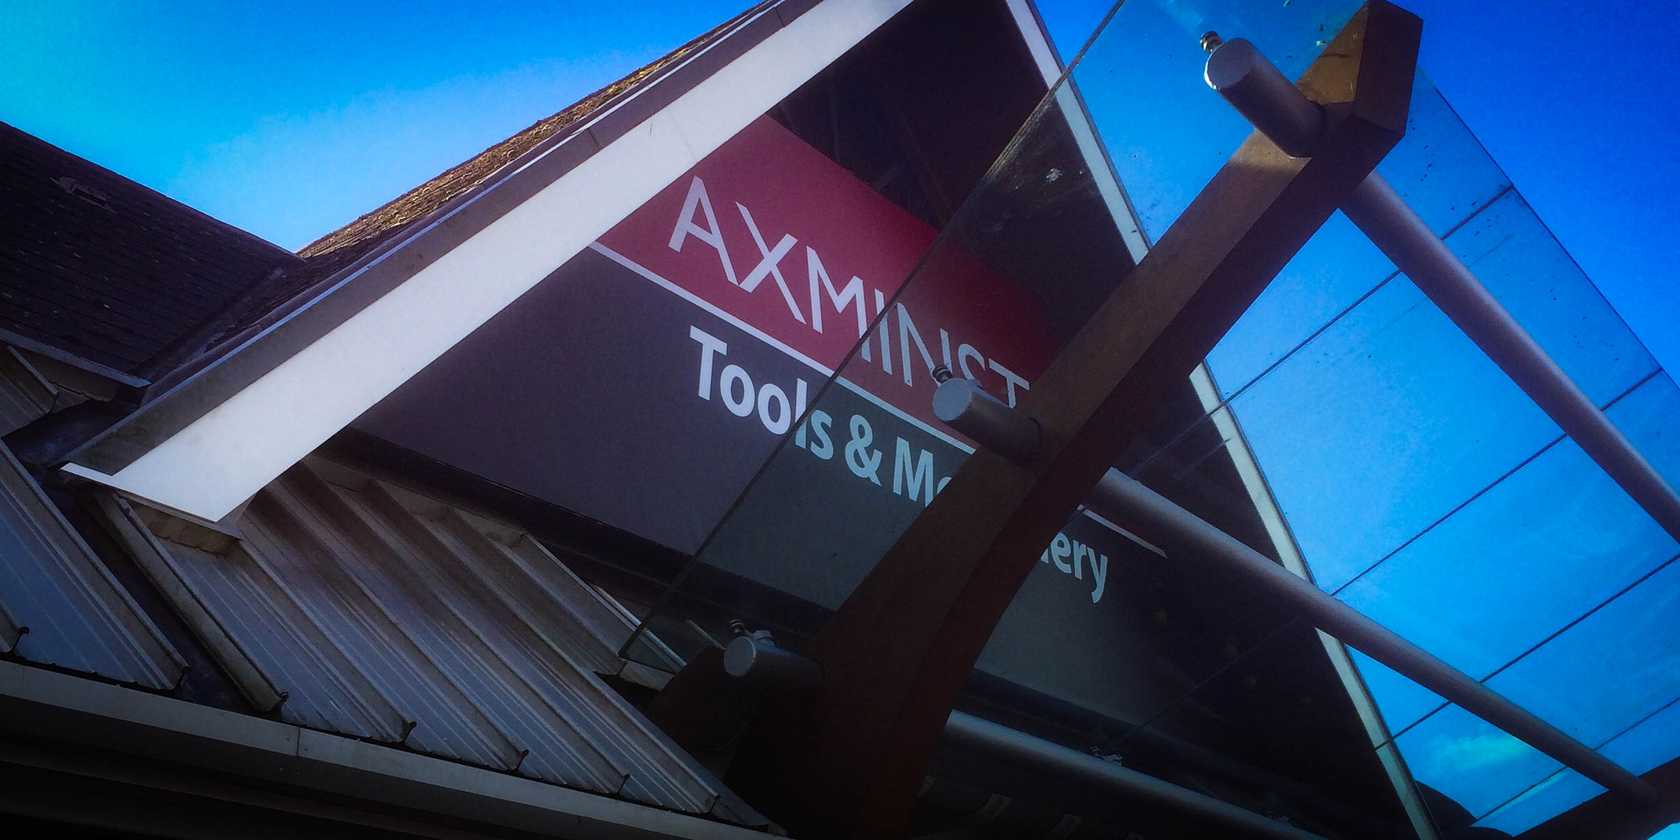 External Signs for Axminster Tools by Creative Solutions